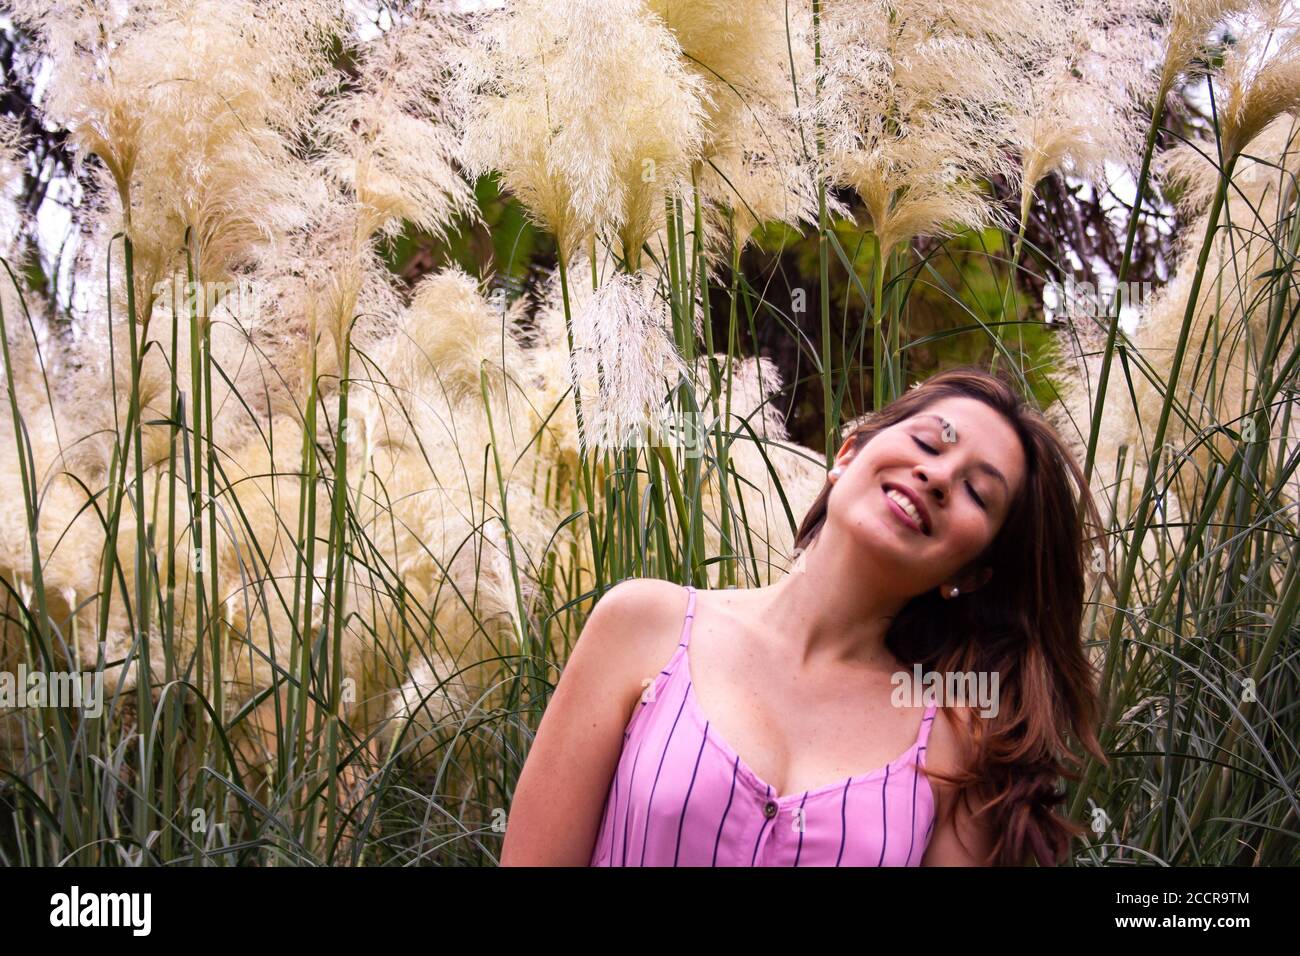 Young woman enjoying a relaxing moment into nature. Some wildflowers surround her in background. Stock Photo